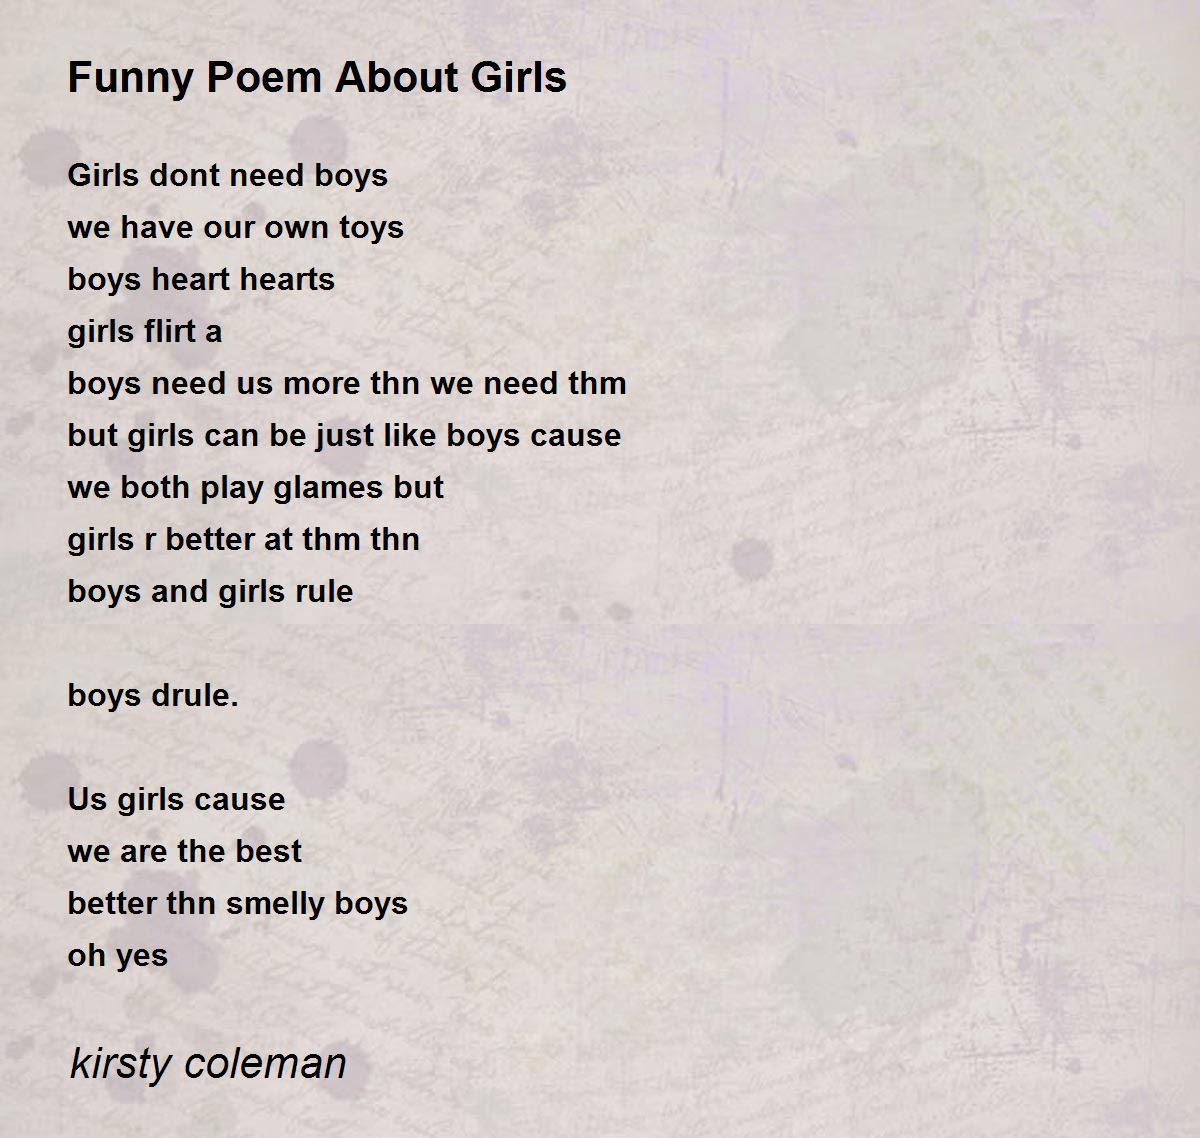 Funny Poem About Girls - Funny Poem About Girls Poem by kirsty coleman